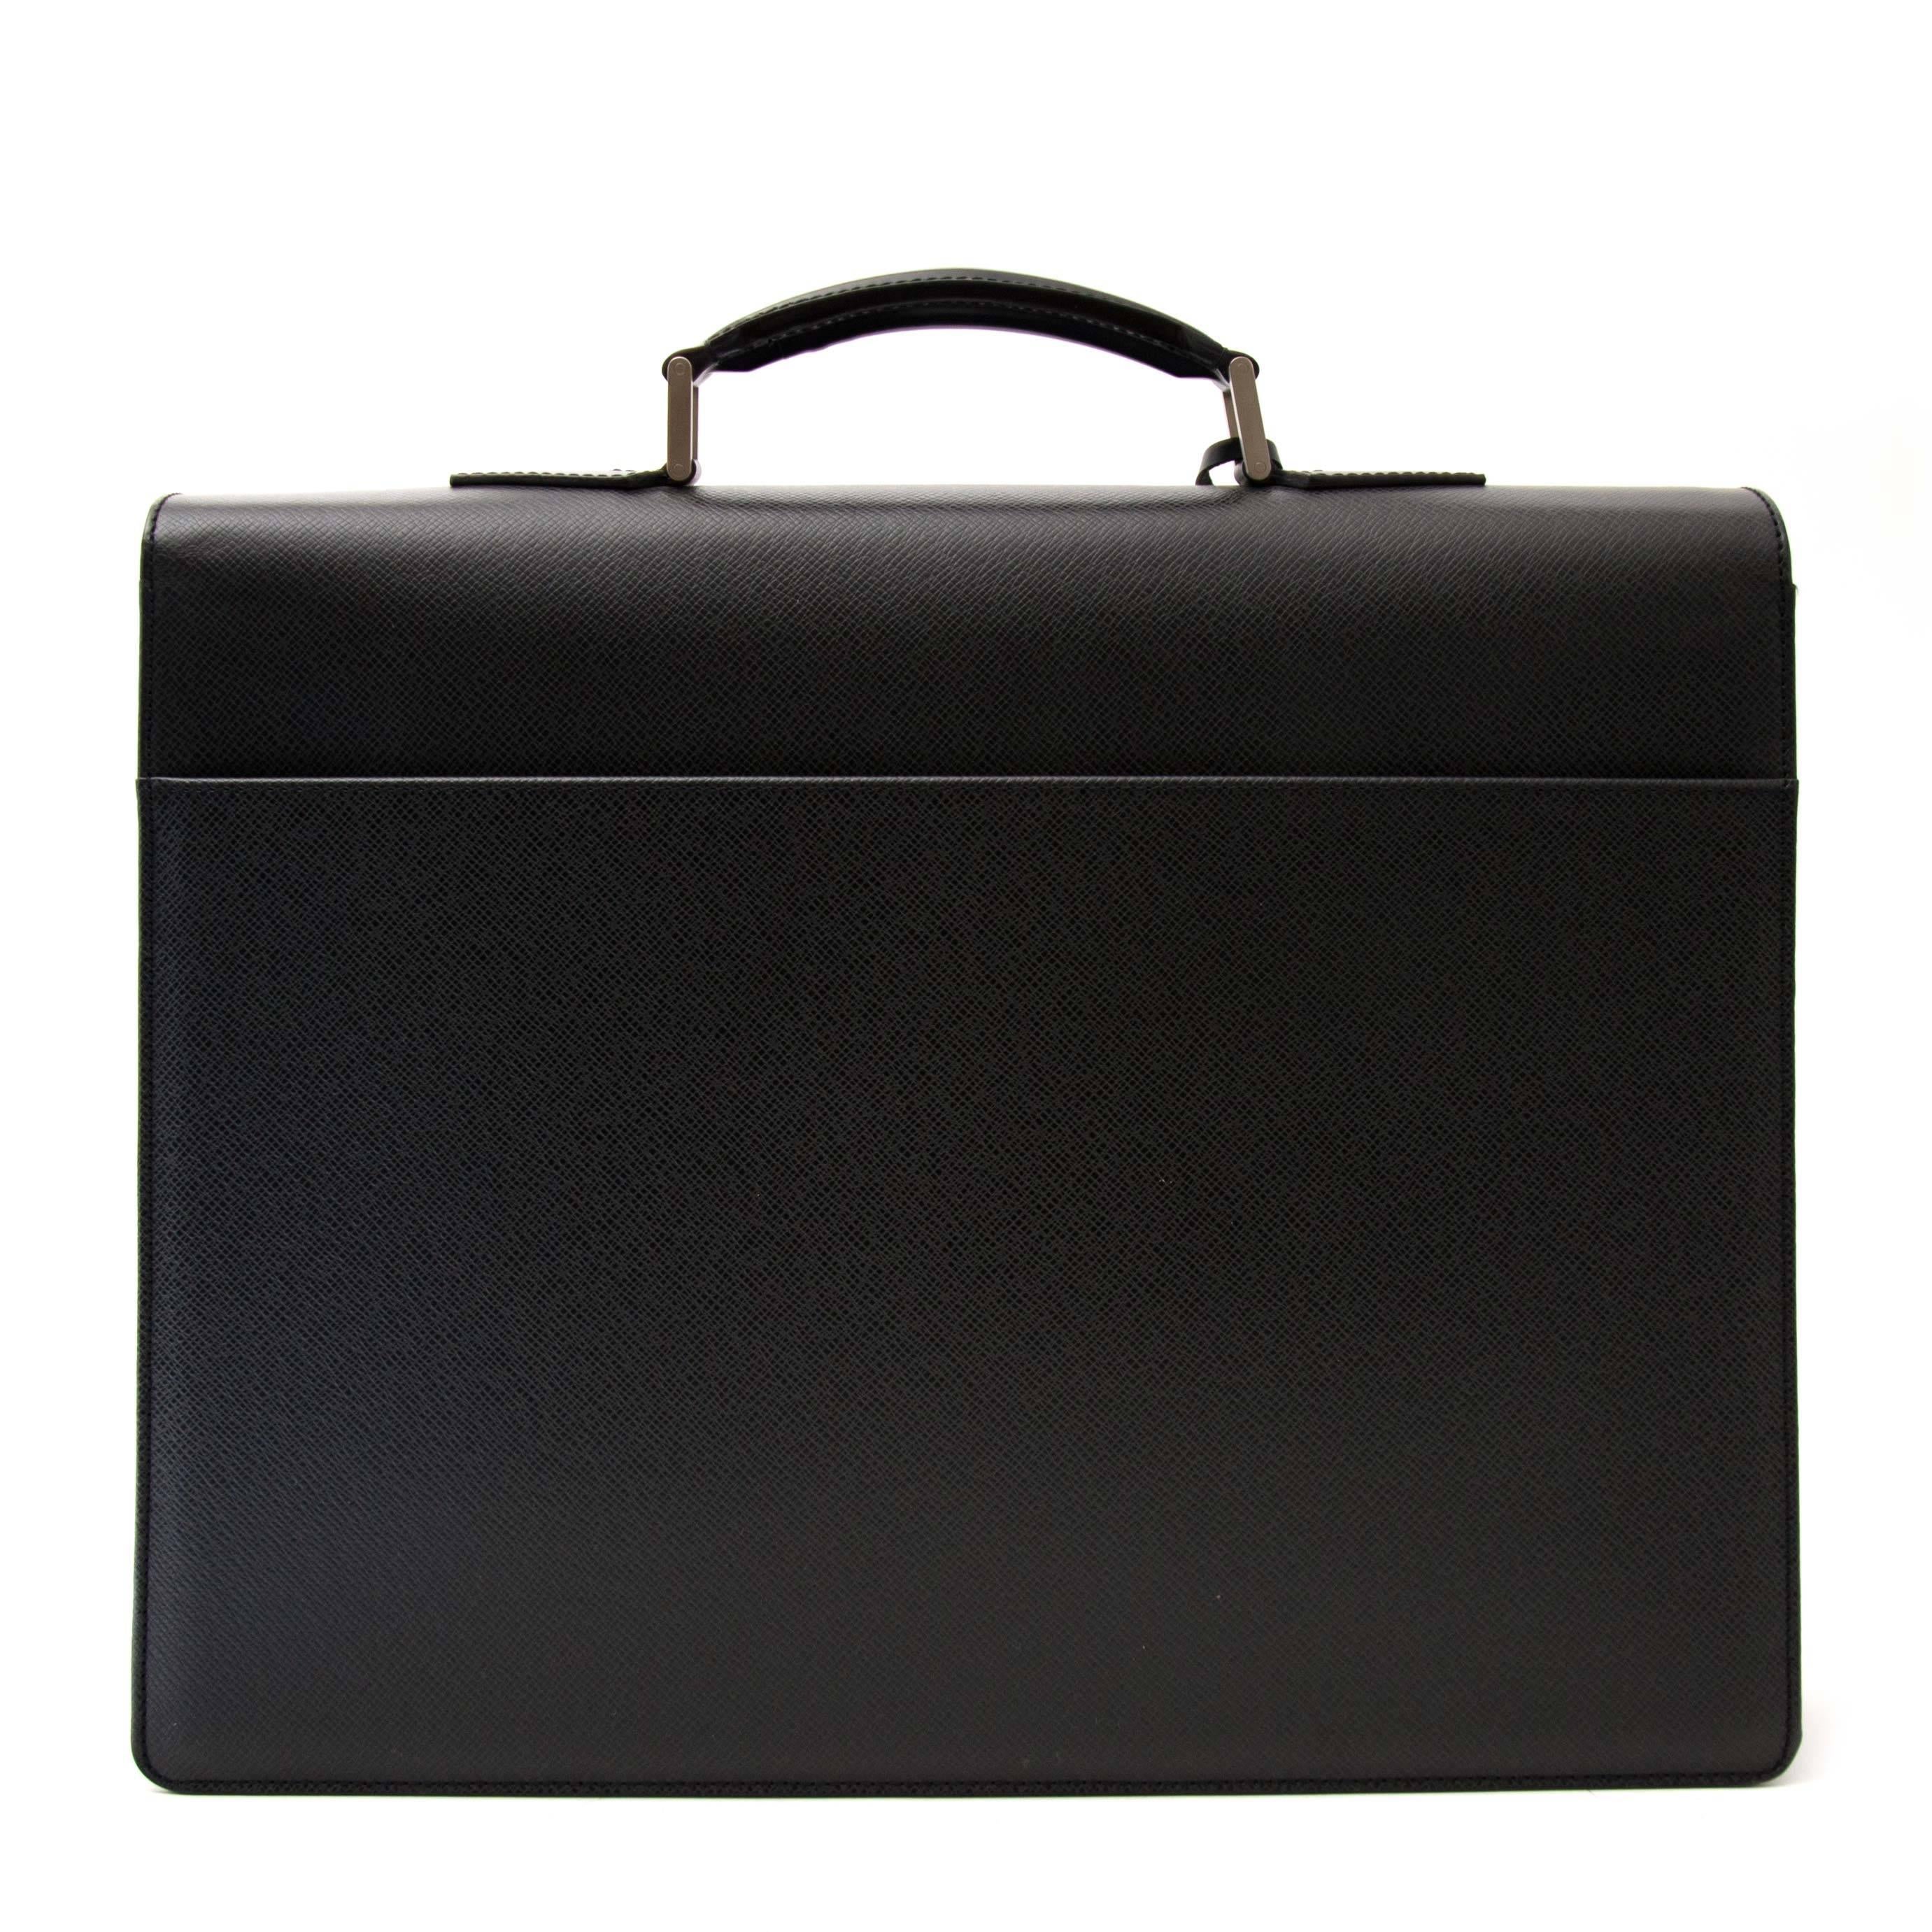 The perfect briefcase for the man who has it all! This Louis Vuitton Briefcase Associé is crafted from durable Taïga leather, a sturdy leather type with structure and relief. 

The bag features silver-toned hardware. The interior holds room for